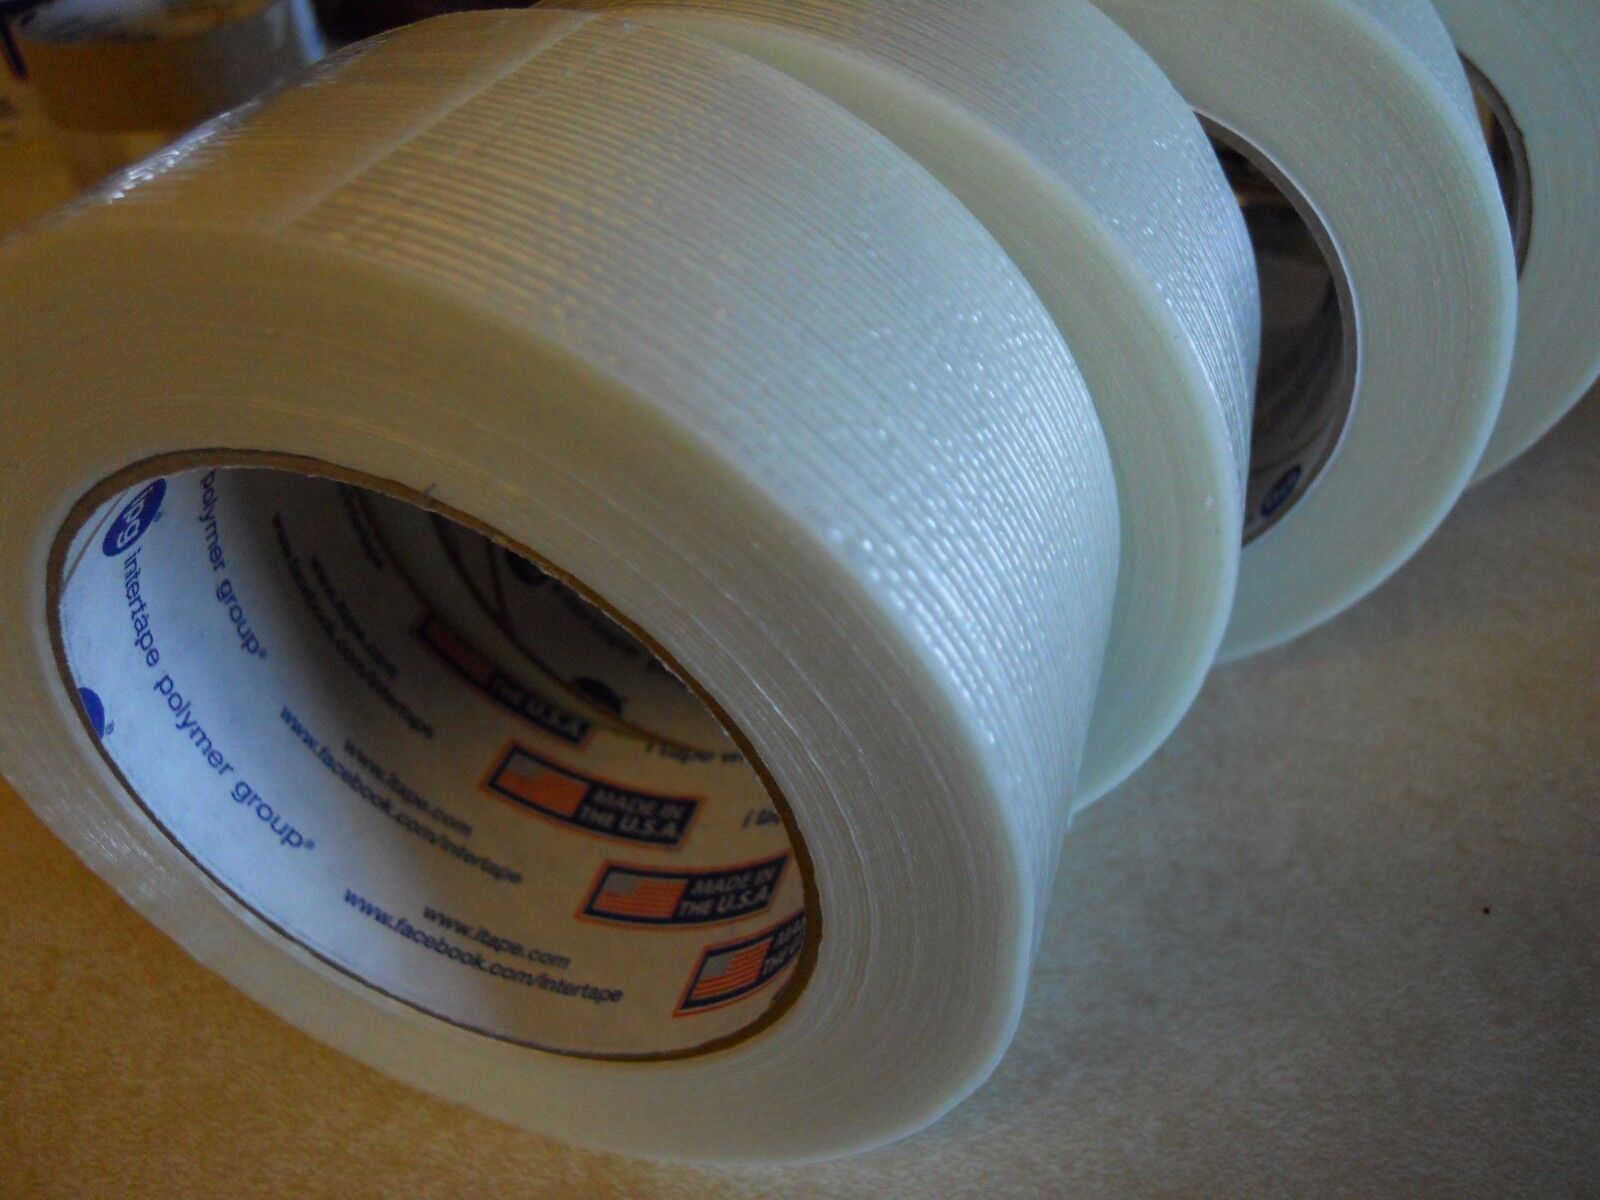 7 Rolls 2" x 60 YDS Fiberglass Reinforced Filament Strapping, Packing Tape Clear Unbranded/Generic Does Not Apply